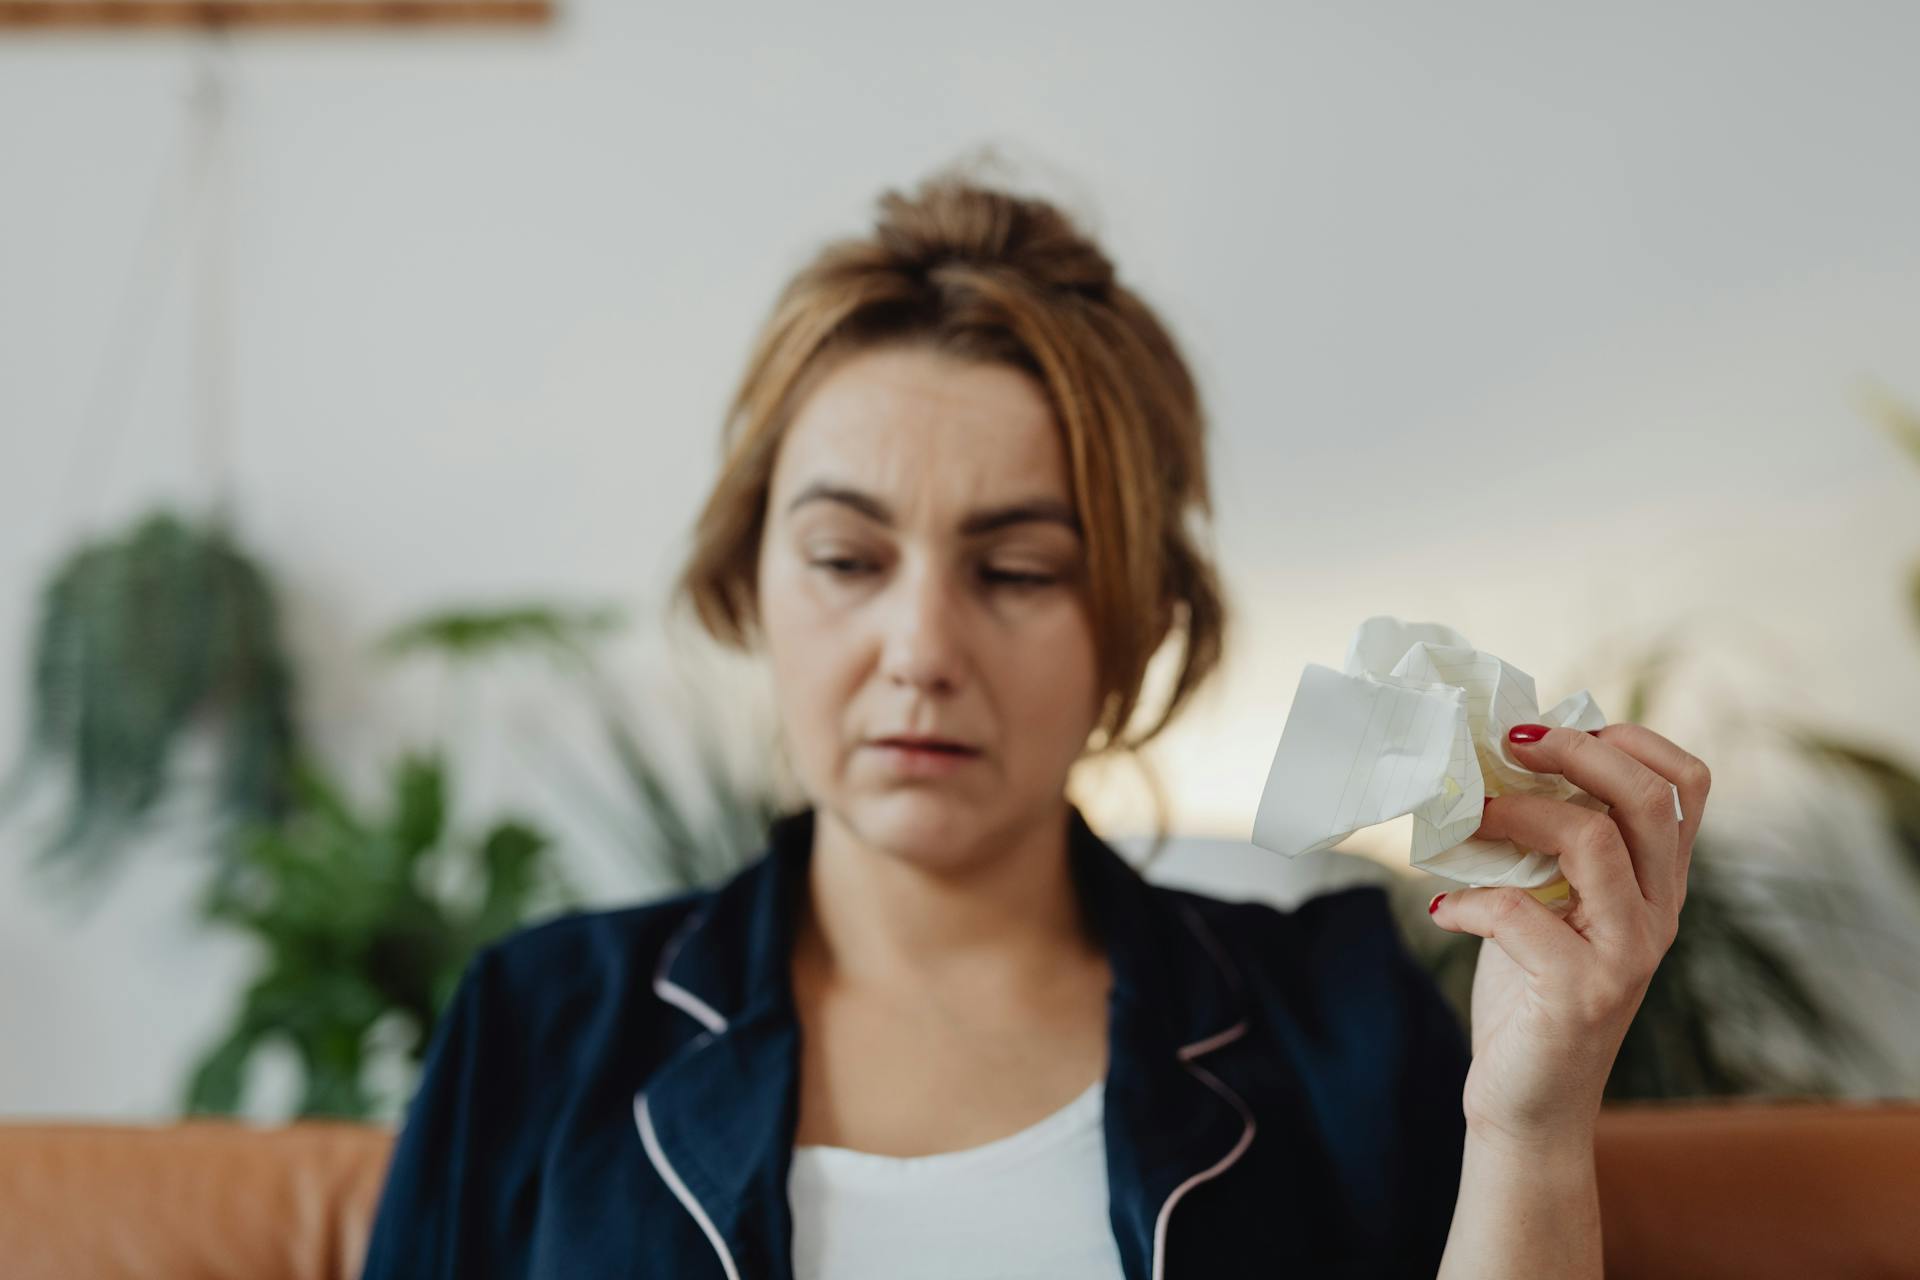 Woman holding a crumpled paper | Source: Pexels